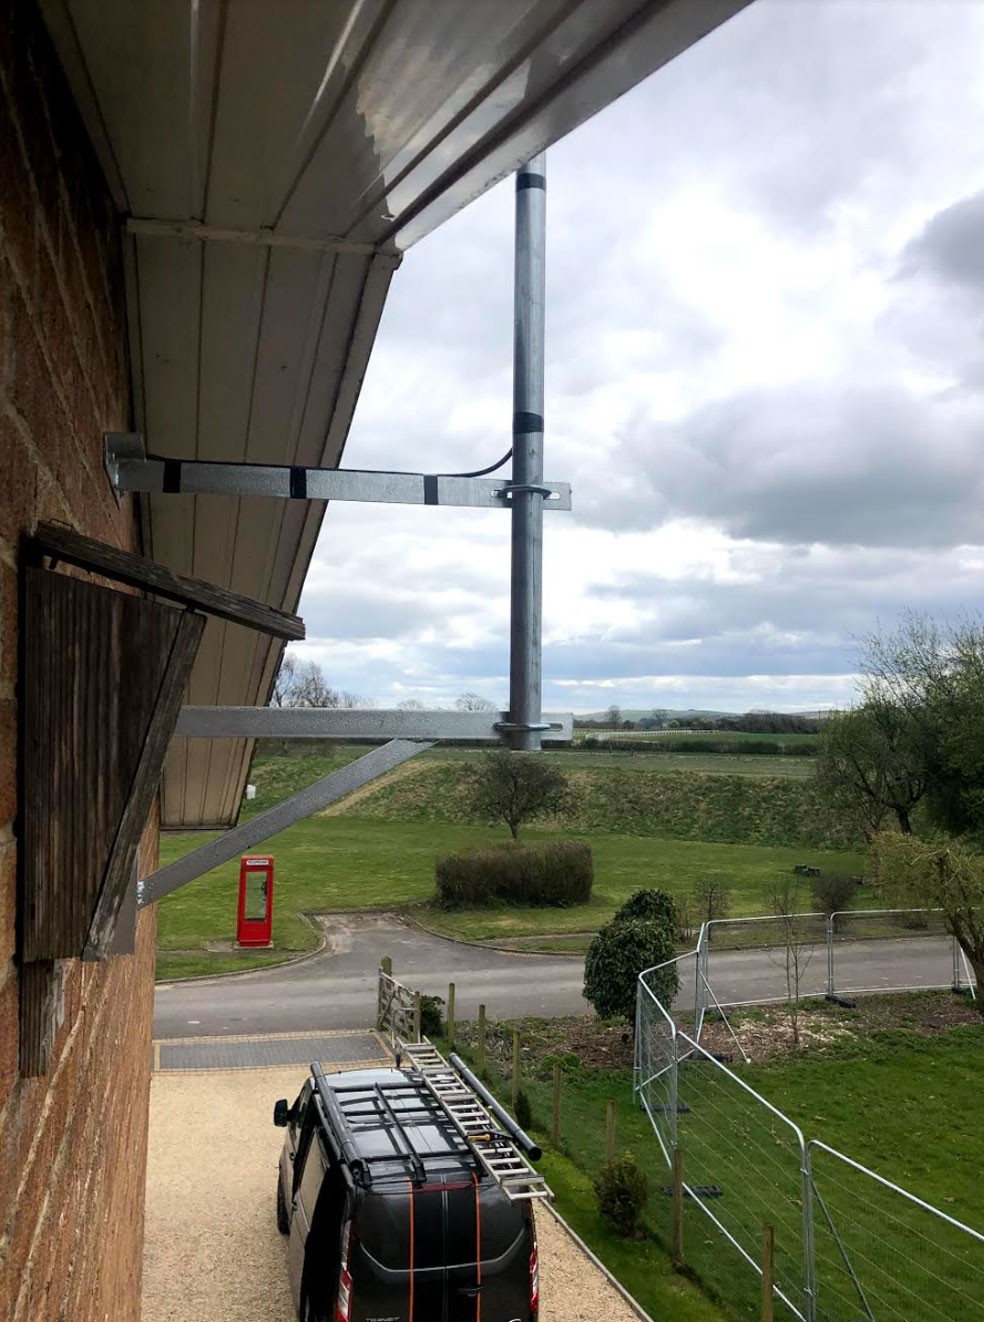 Professional satellite installation in Trowbridge Wiltshire using our own manufactured parts.